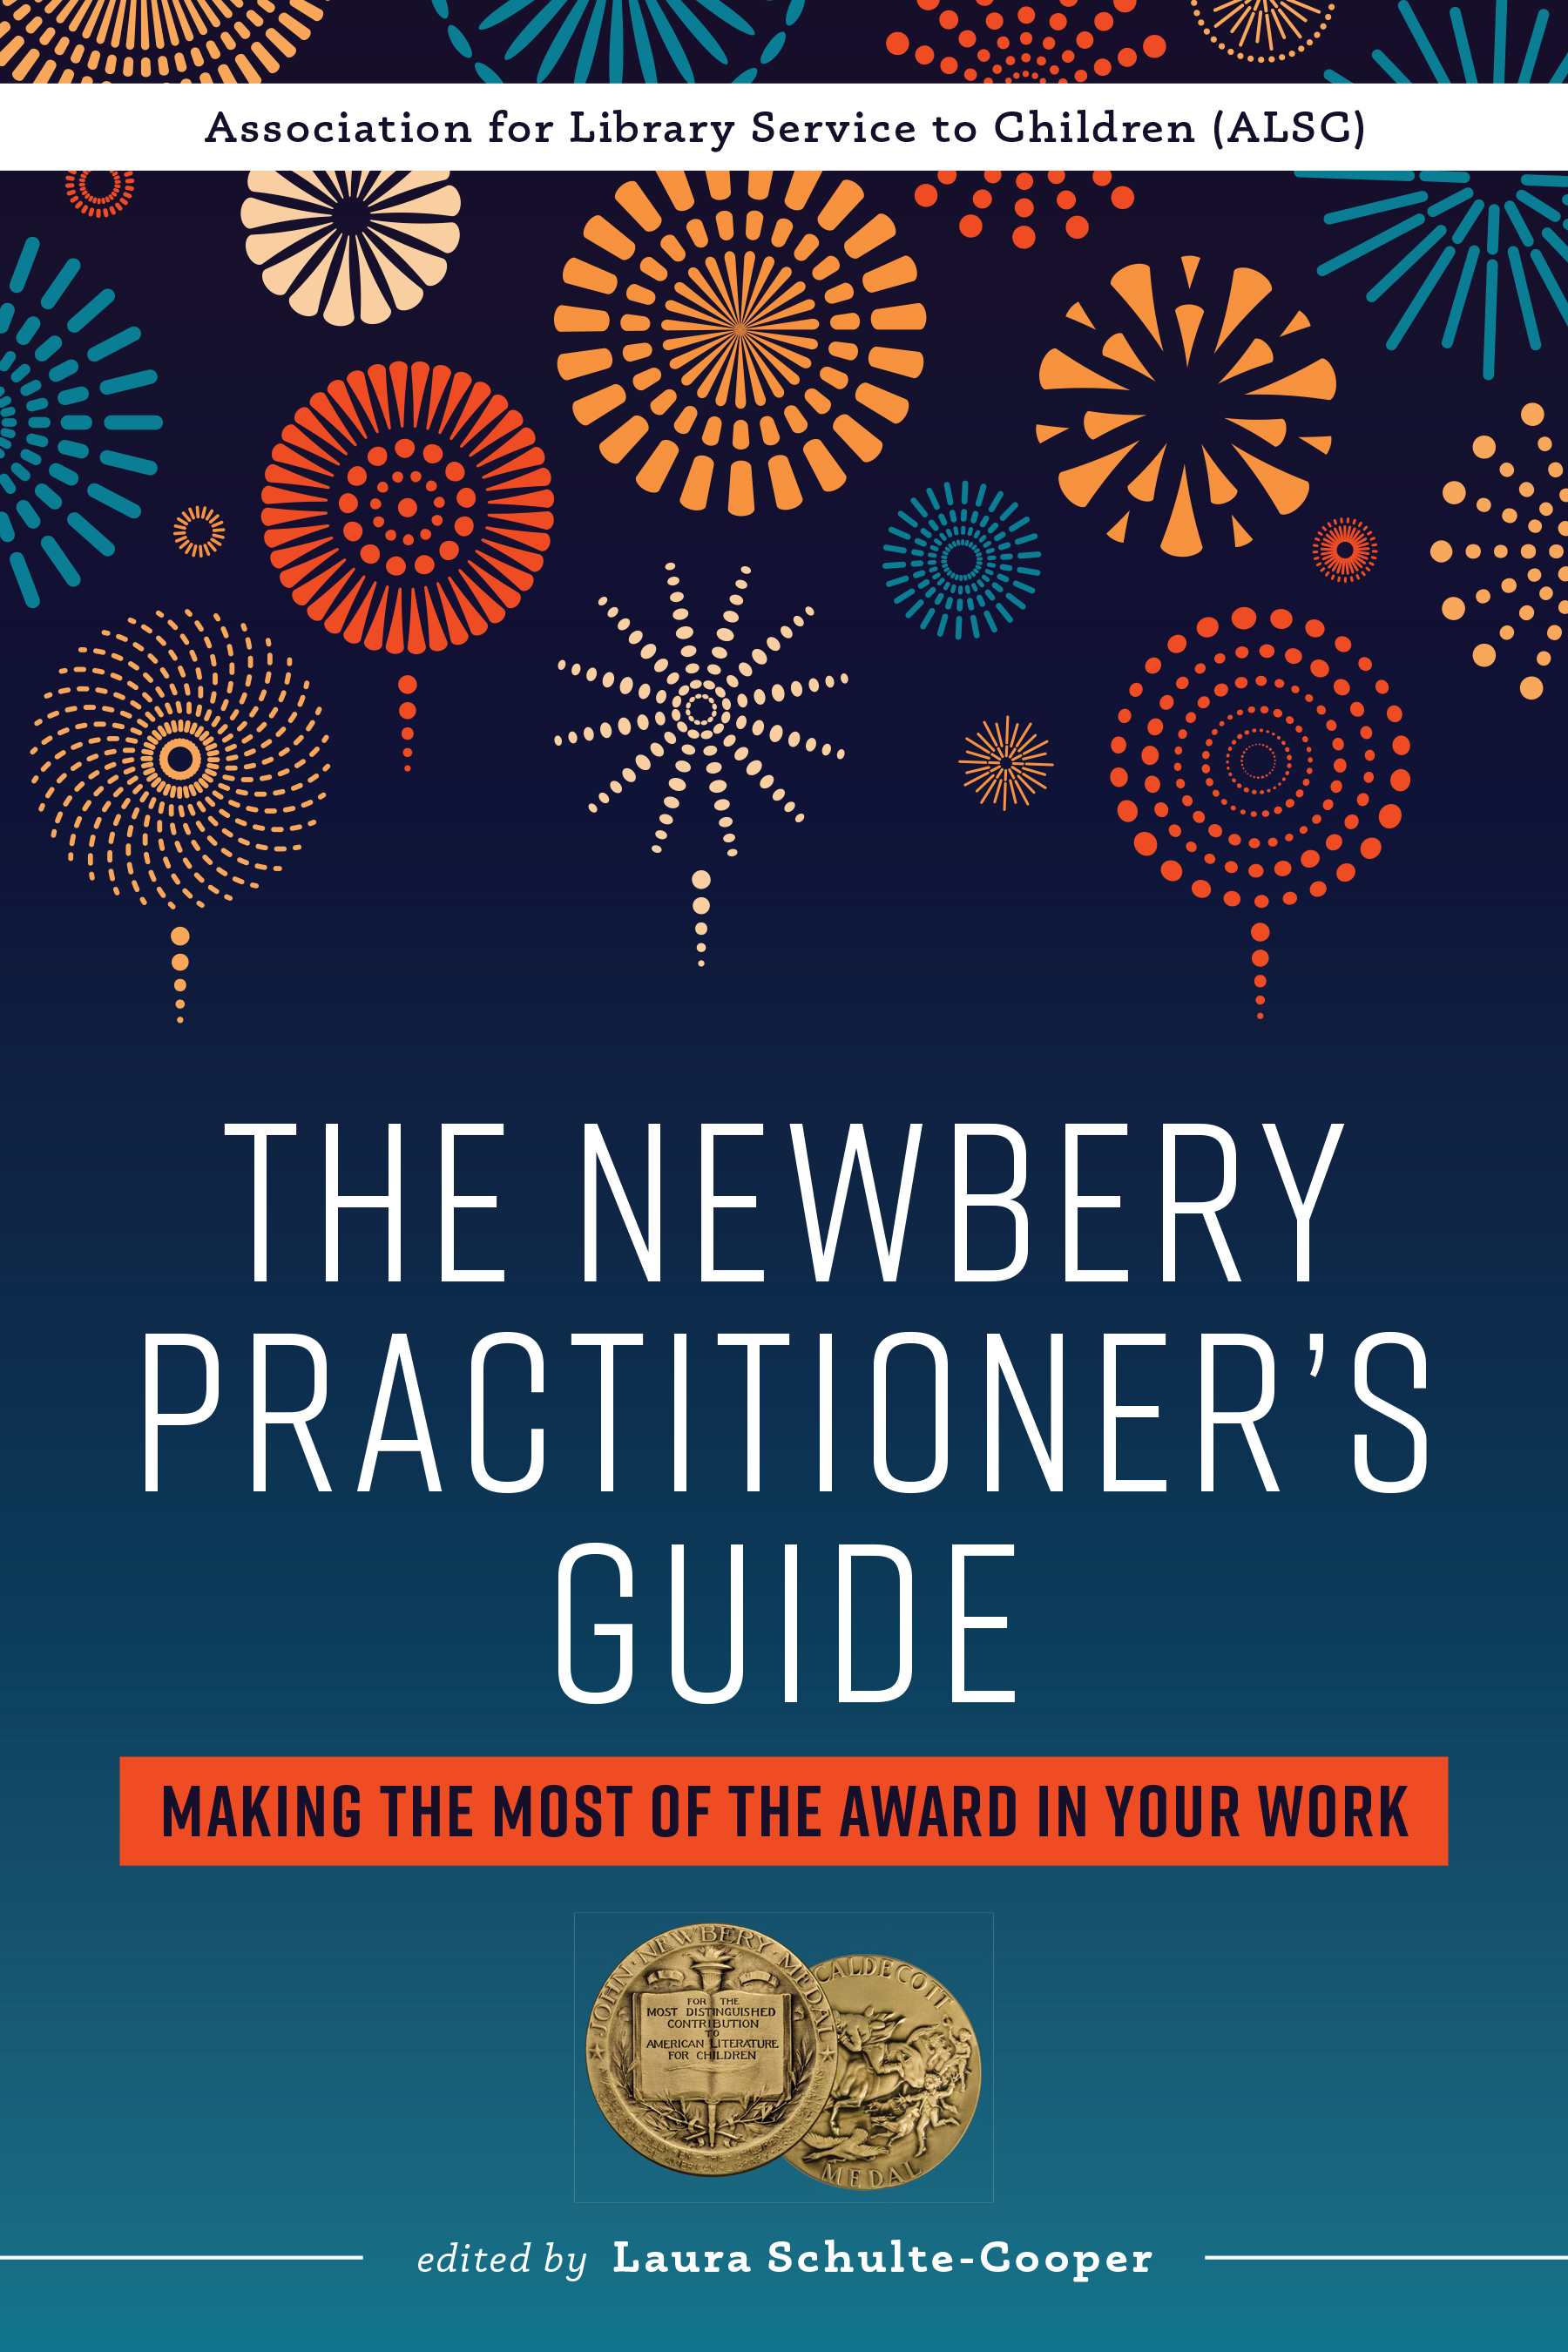 Newbery Practitioner's Guide